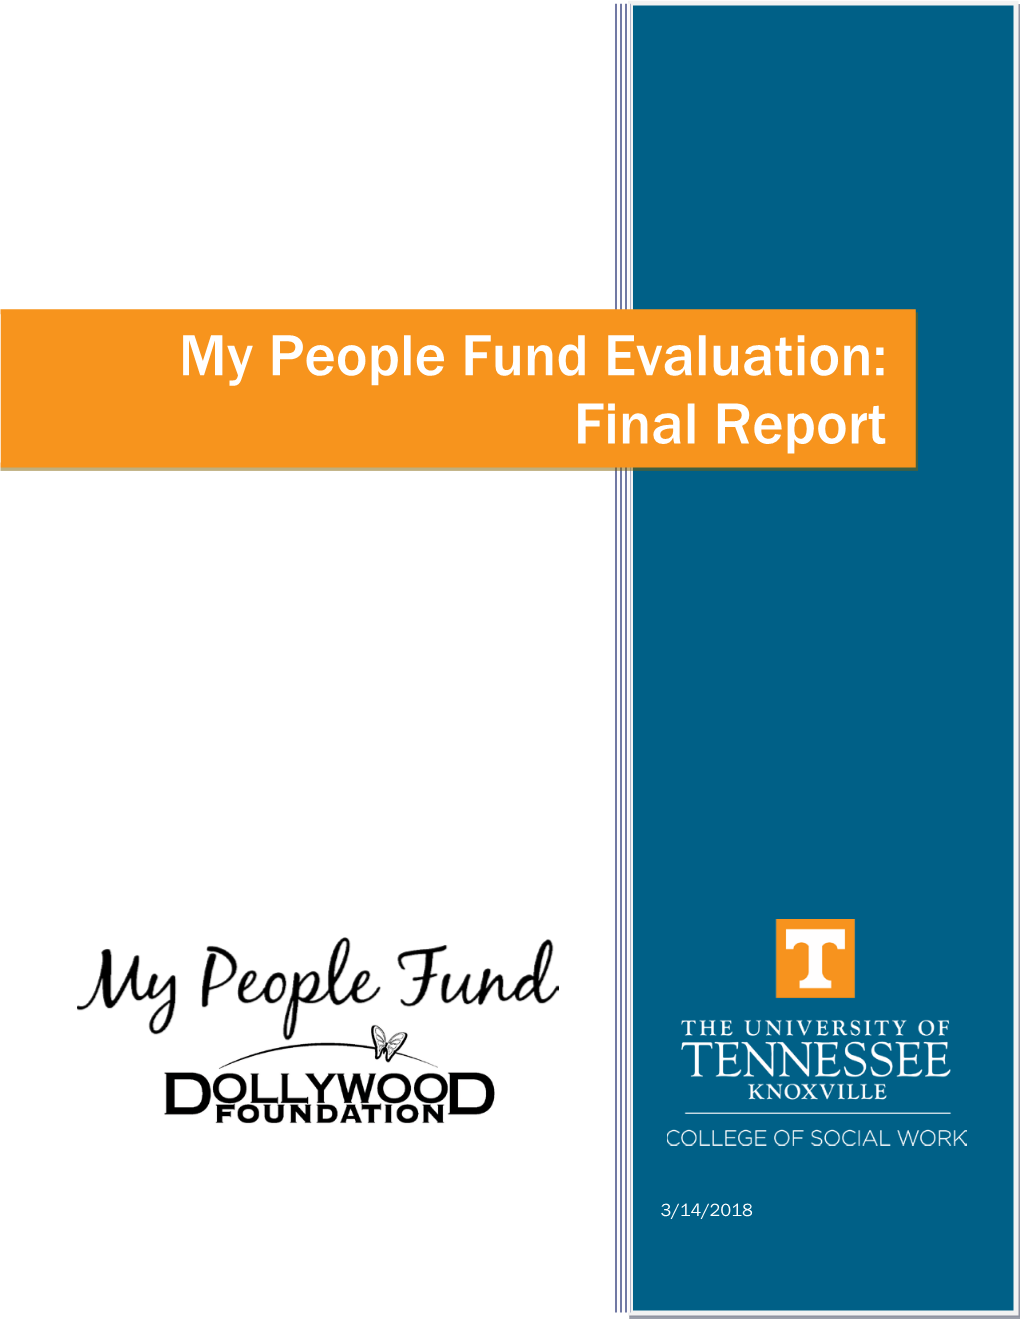 My People Fund Evaluation: Final Report 2